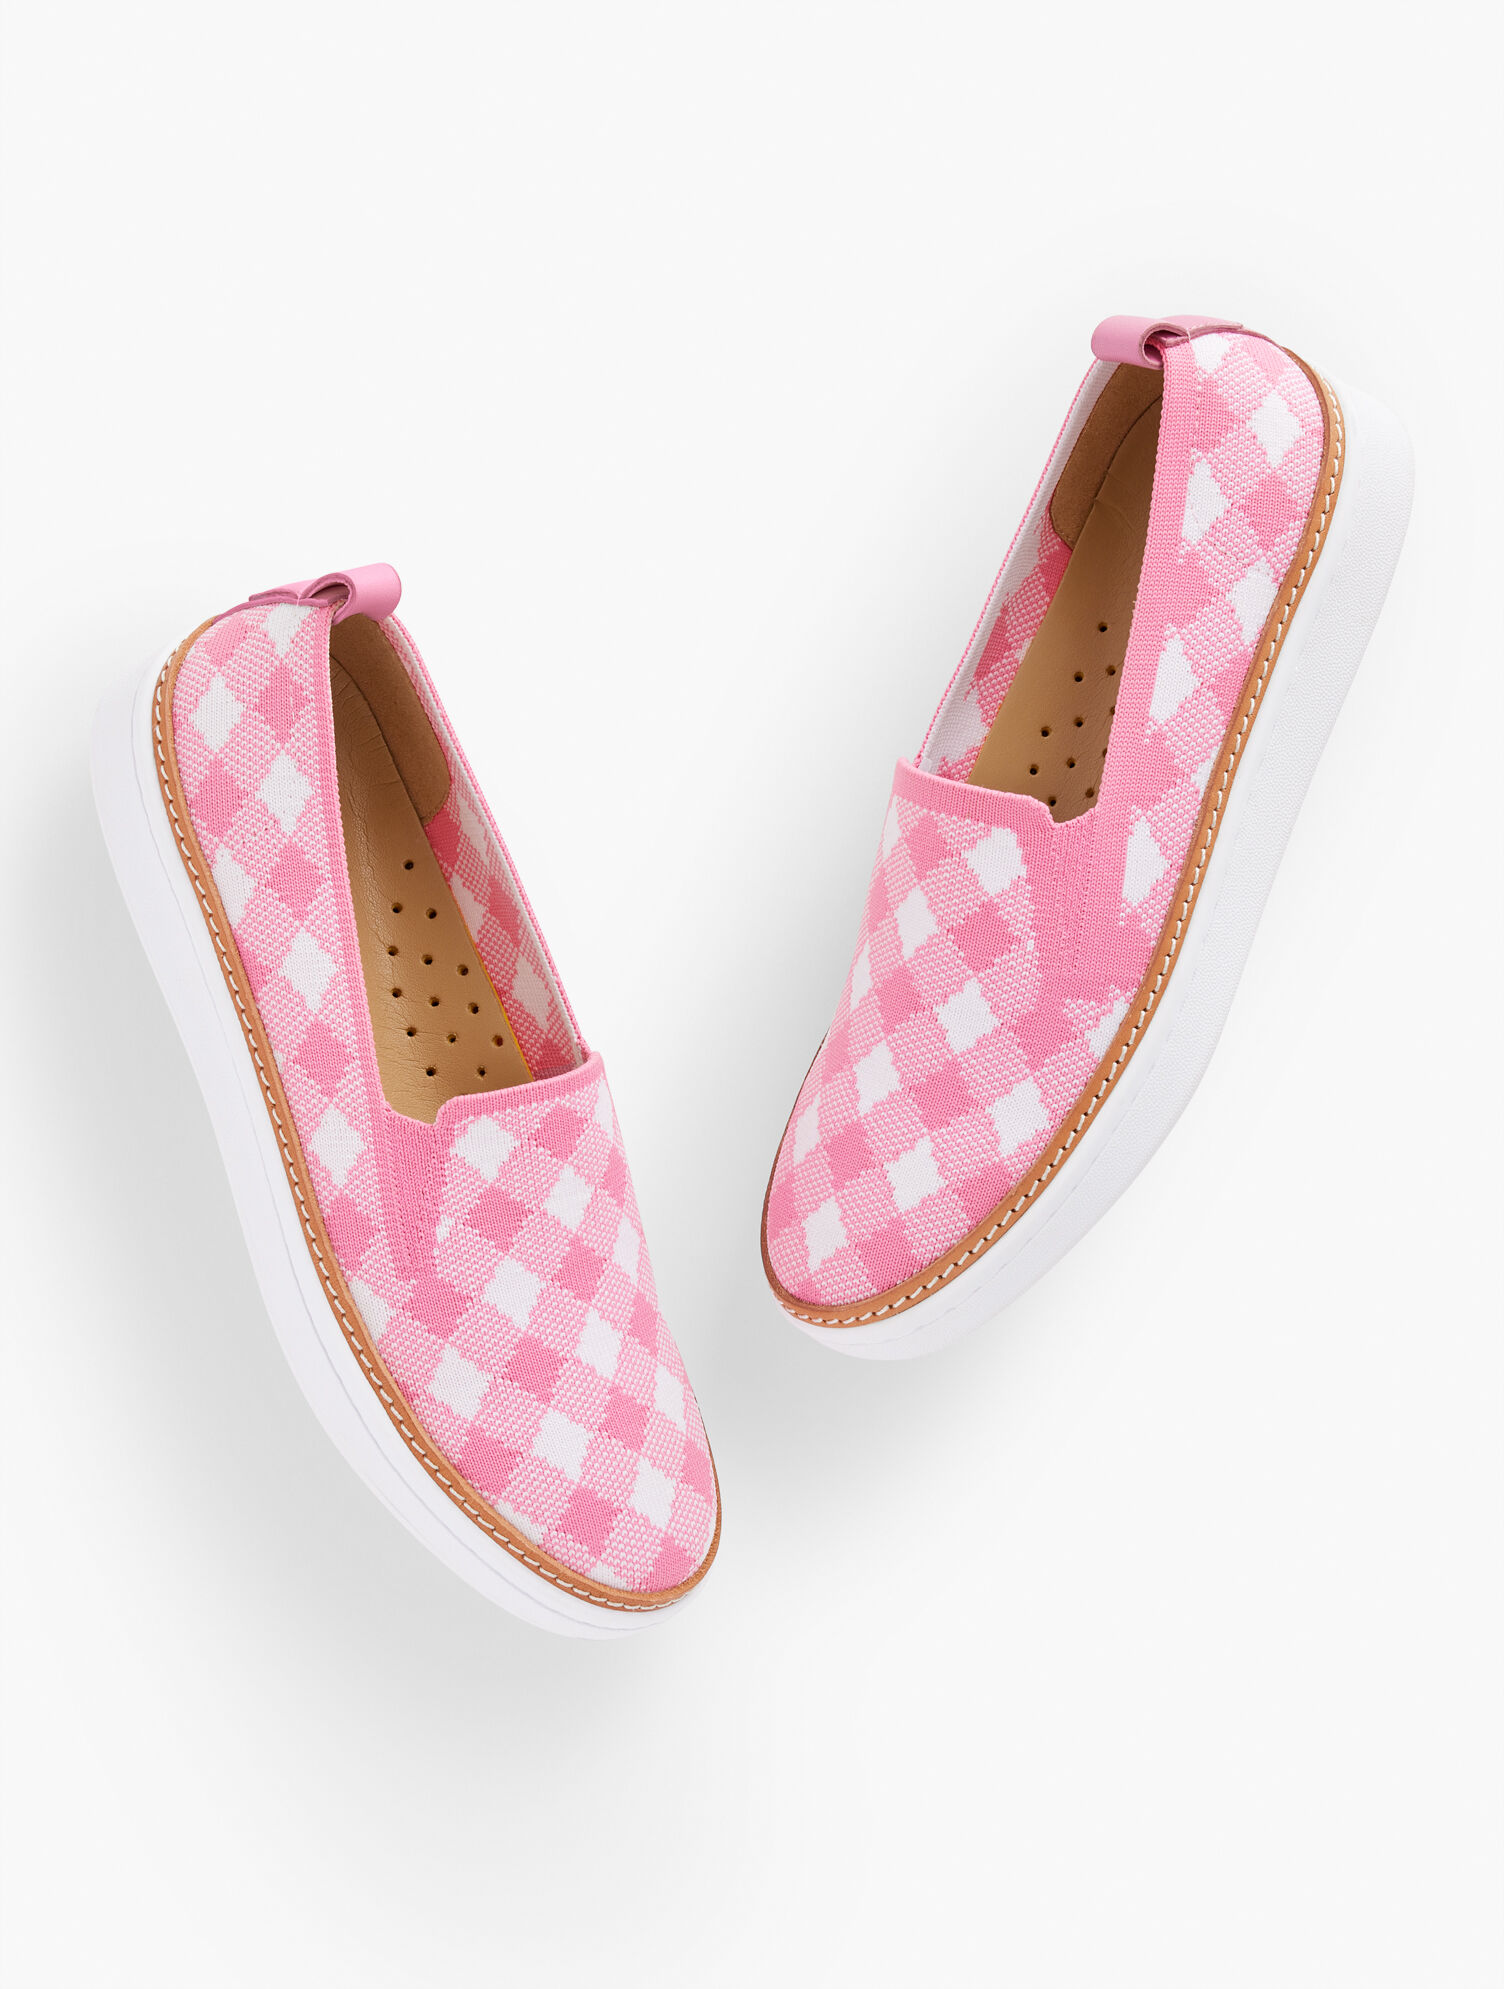 Brittany Knit Sneakers - Gingham | Talbots